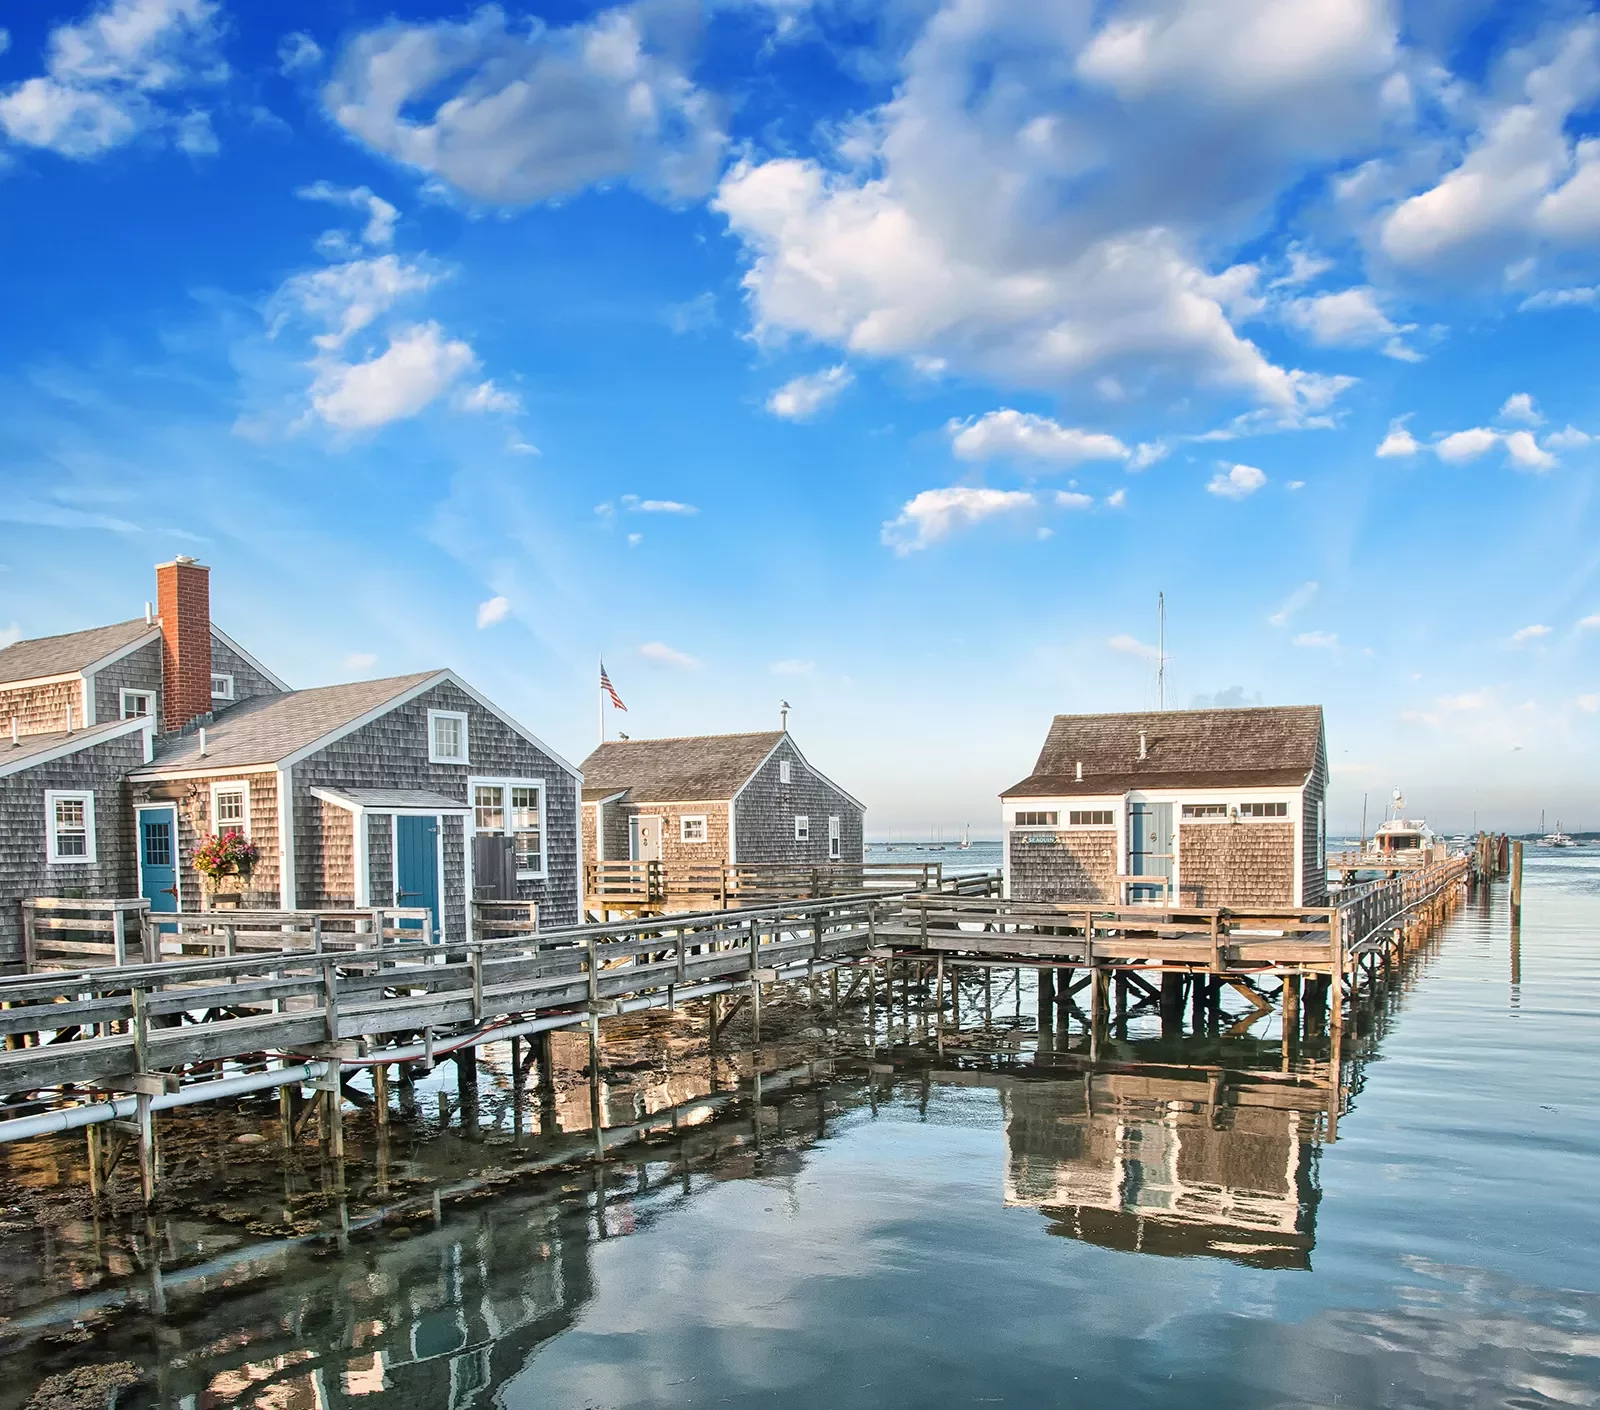 Shot of three small houses on the water, pier and small boat in background.